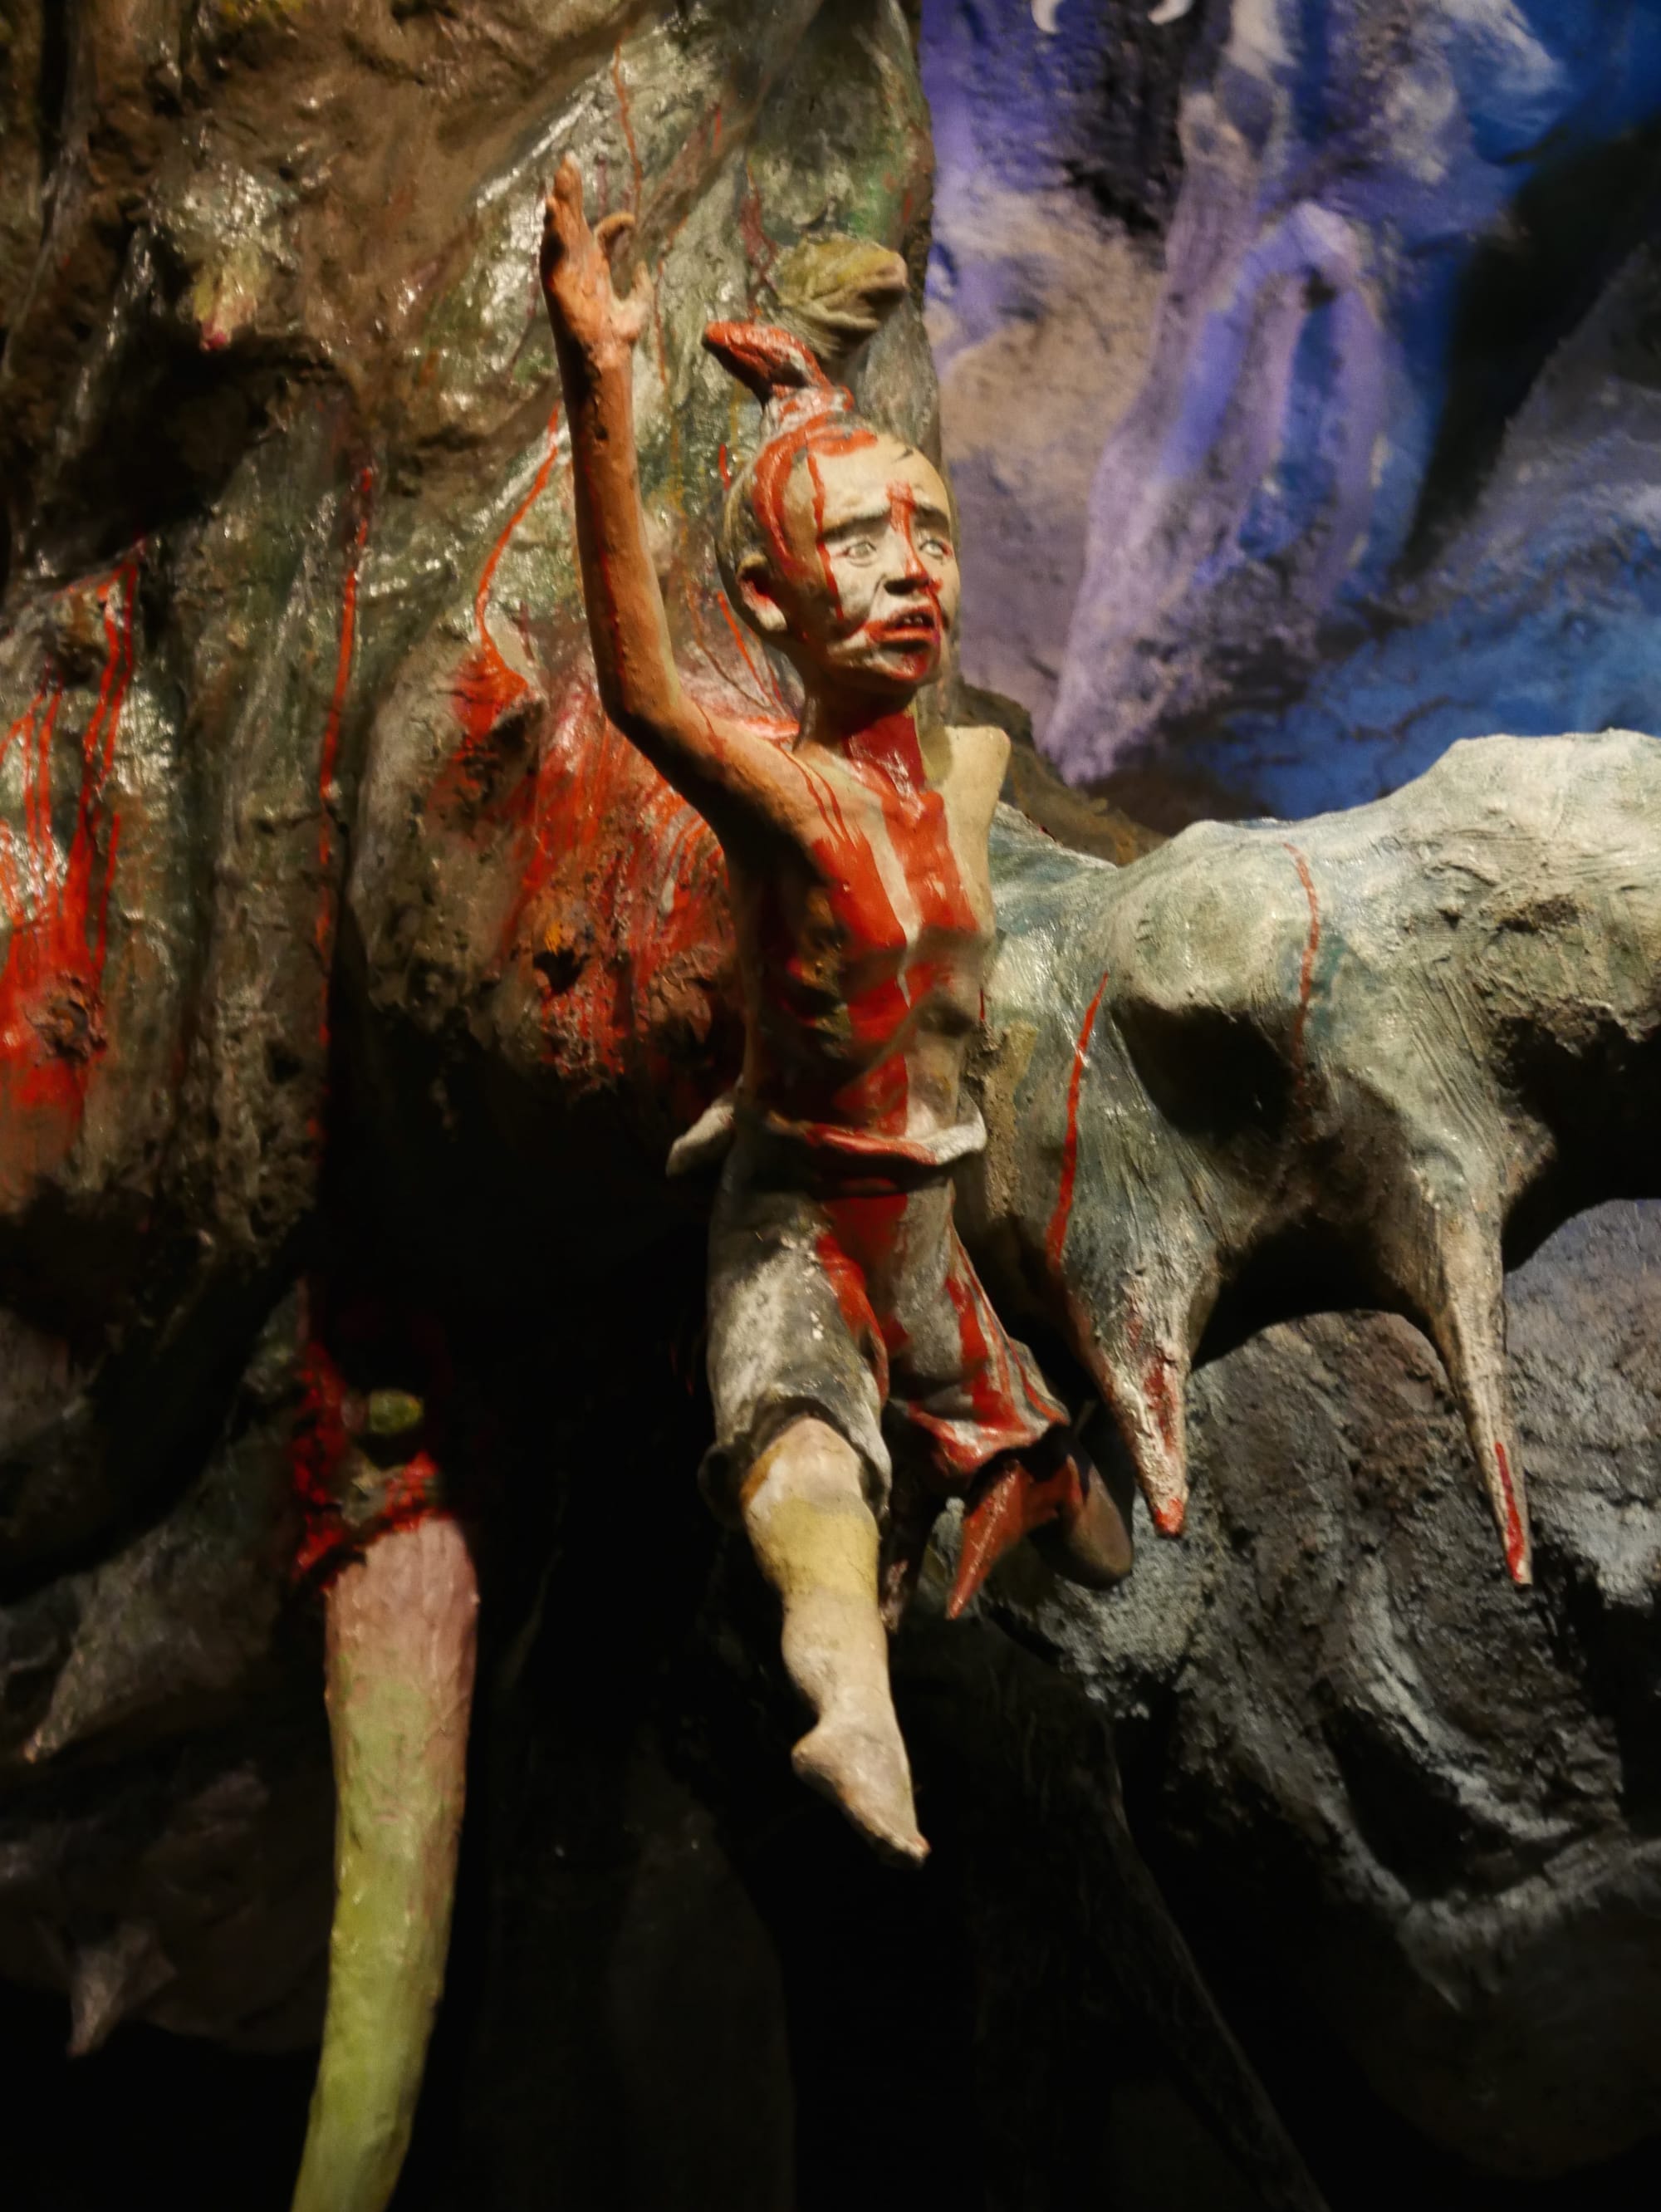 Photo by Author — tree of knives — punishment in the Sixth Court of Hell (King Piencheng) — 10 Courts of Hell, Haw Par Villa, Singapore